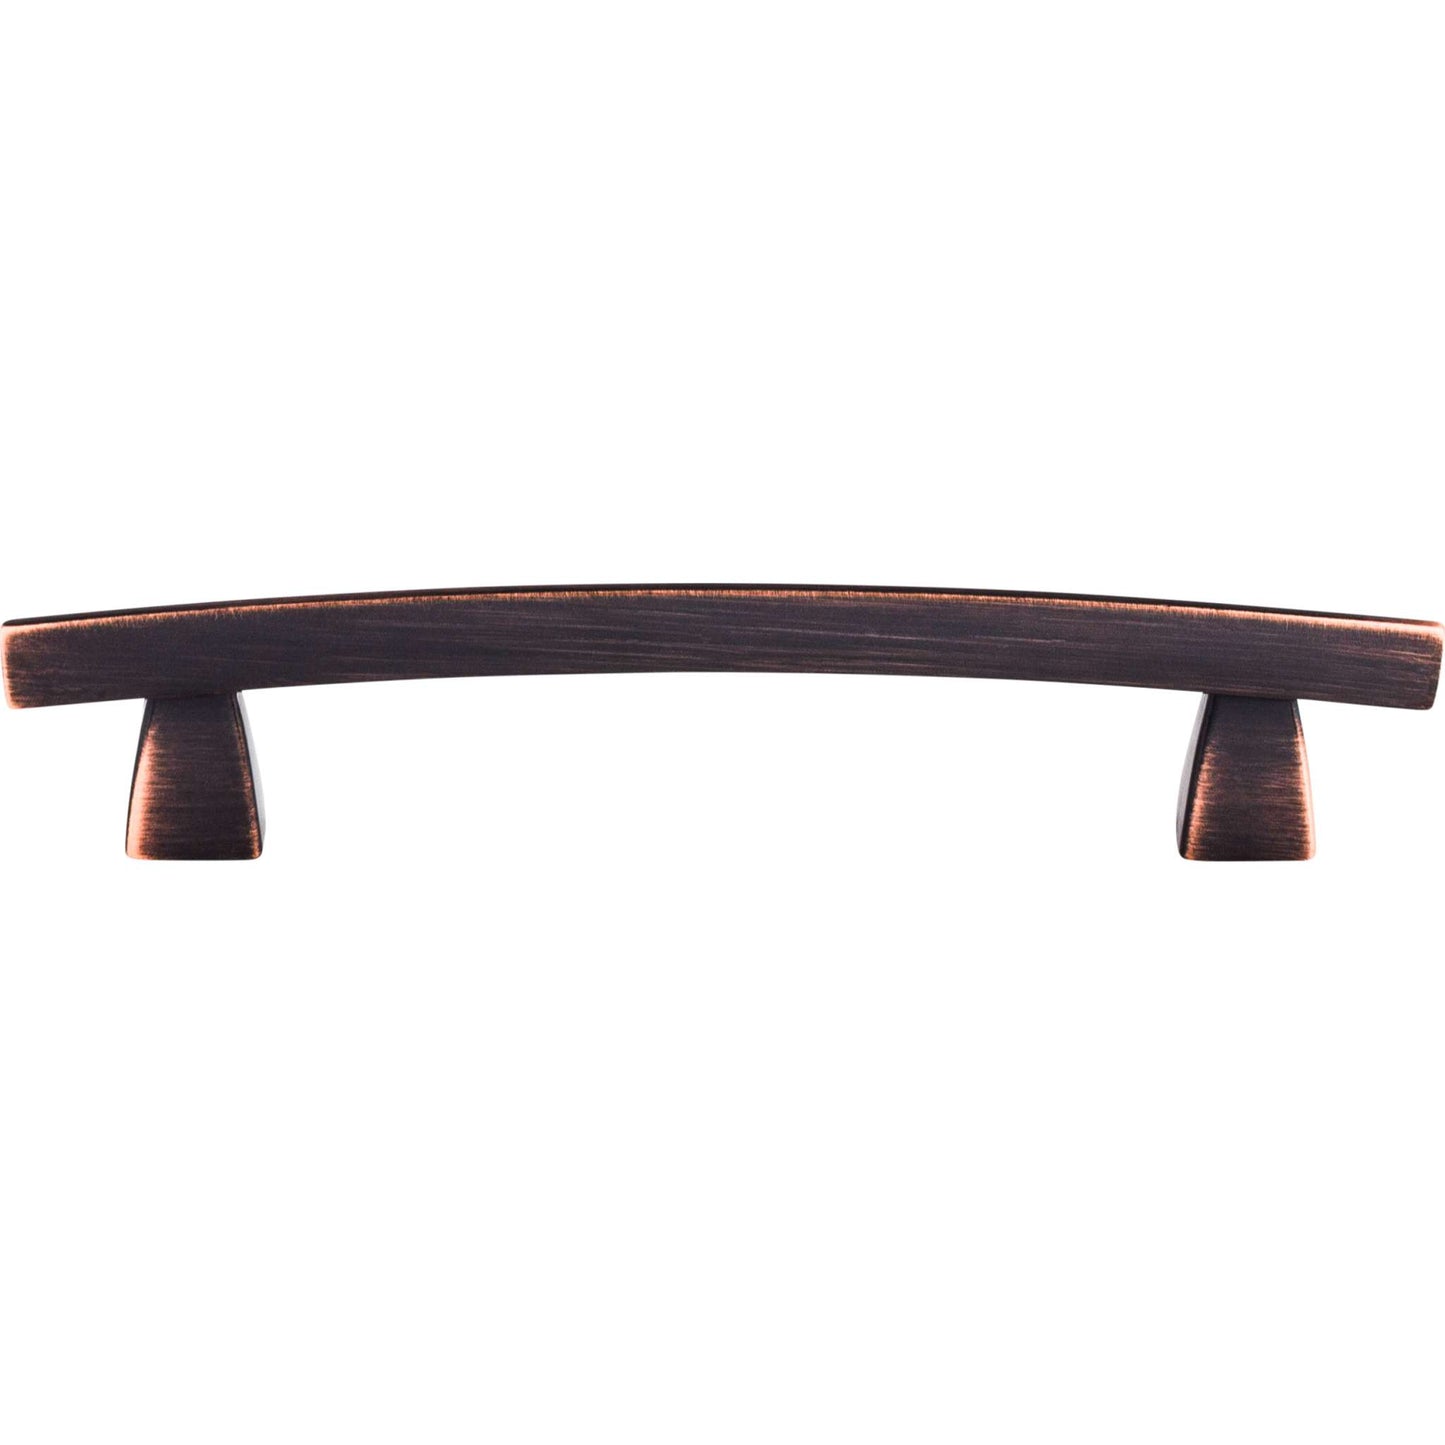 Top Knobs - Arched Pull